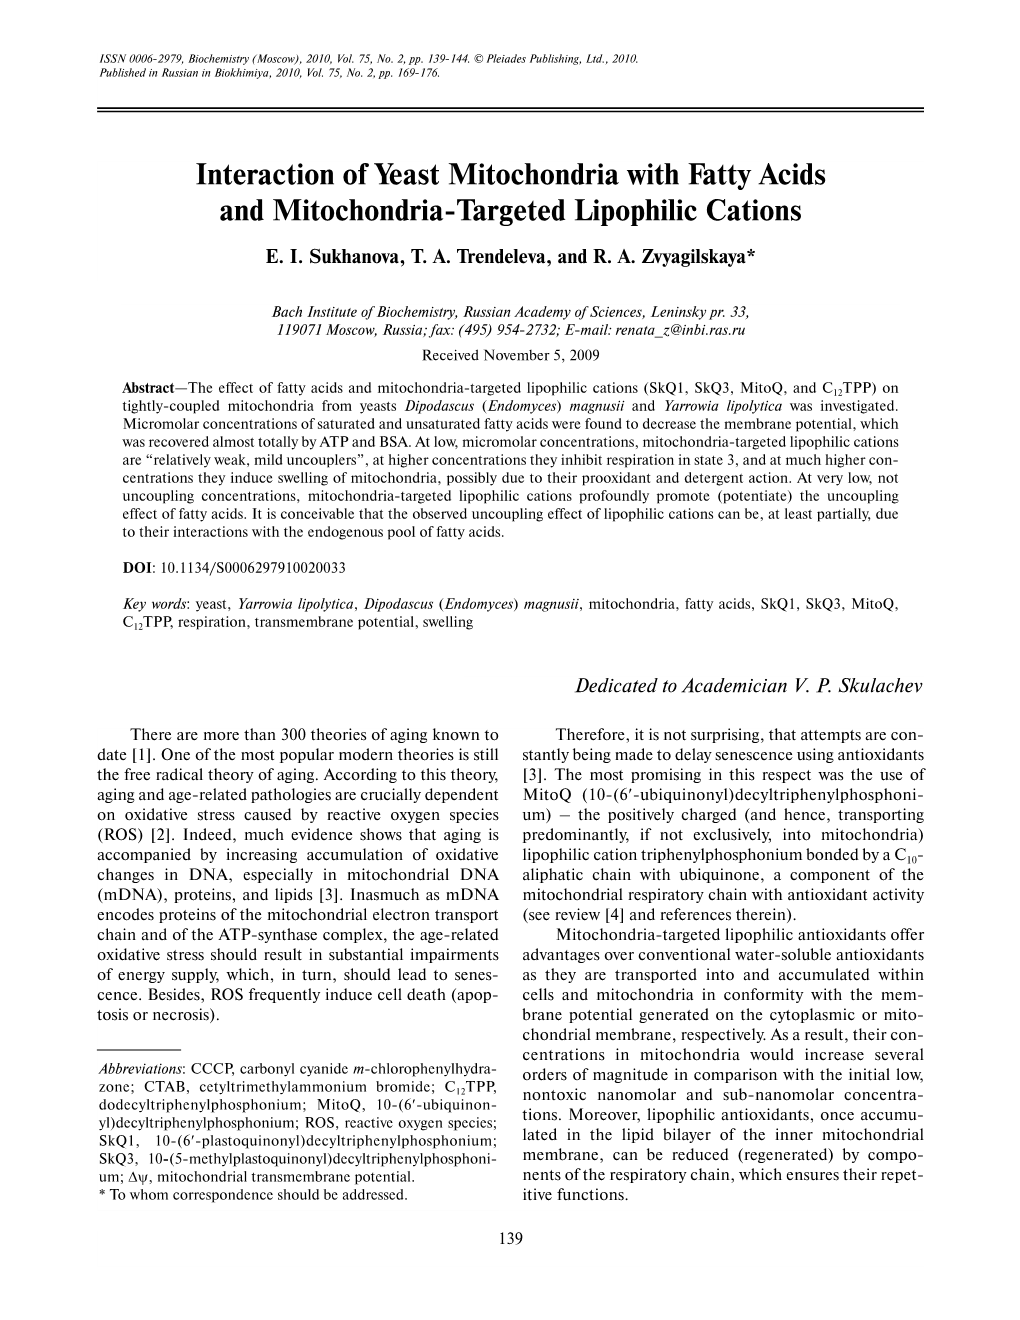 Interaction of Yeast Mitochondria with Fatty Acids and Mitochondria-Targeted Lipophilic Cations